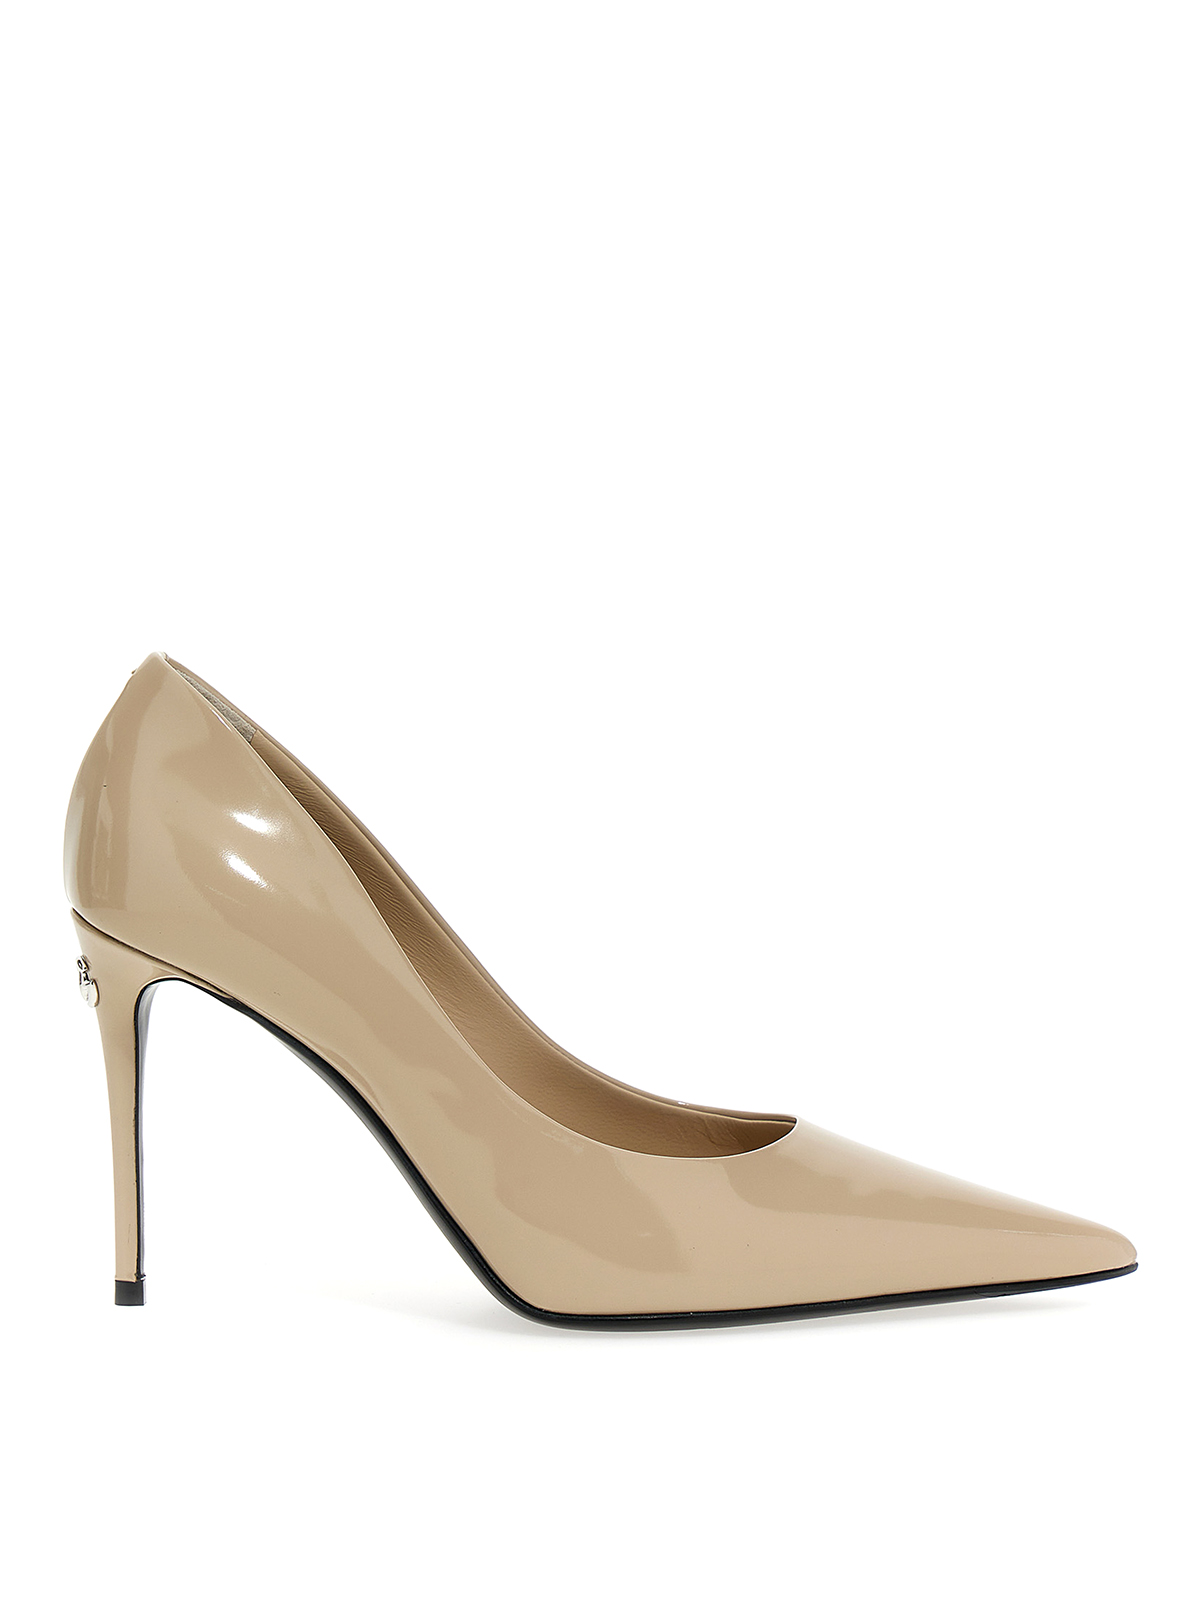 Dolce & Gabbana Logo Pumps In Shiny Calf Leather In Color Carne Y Neutral